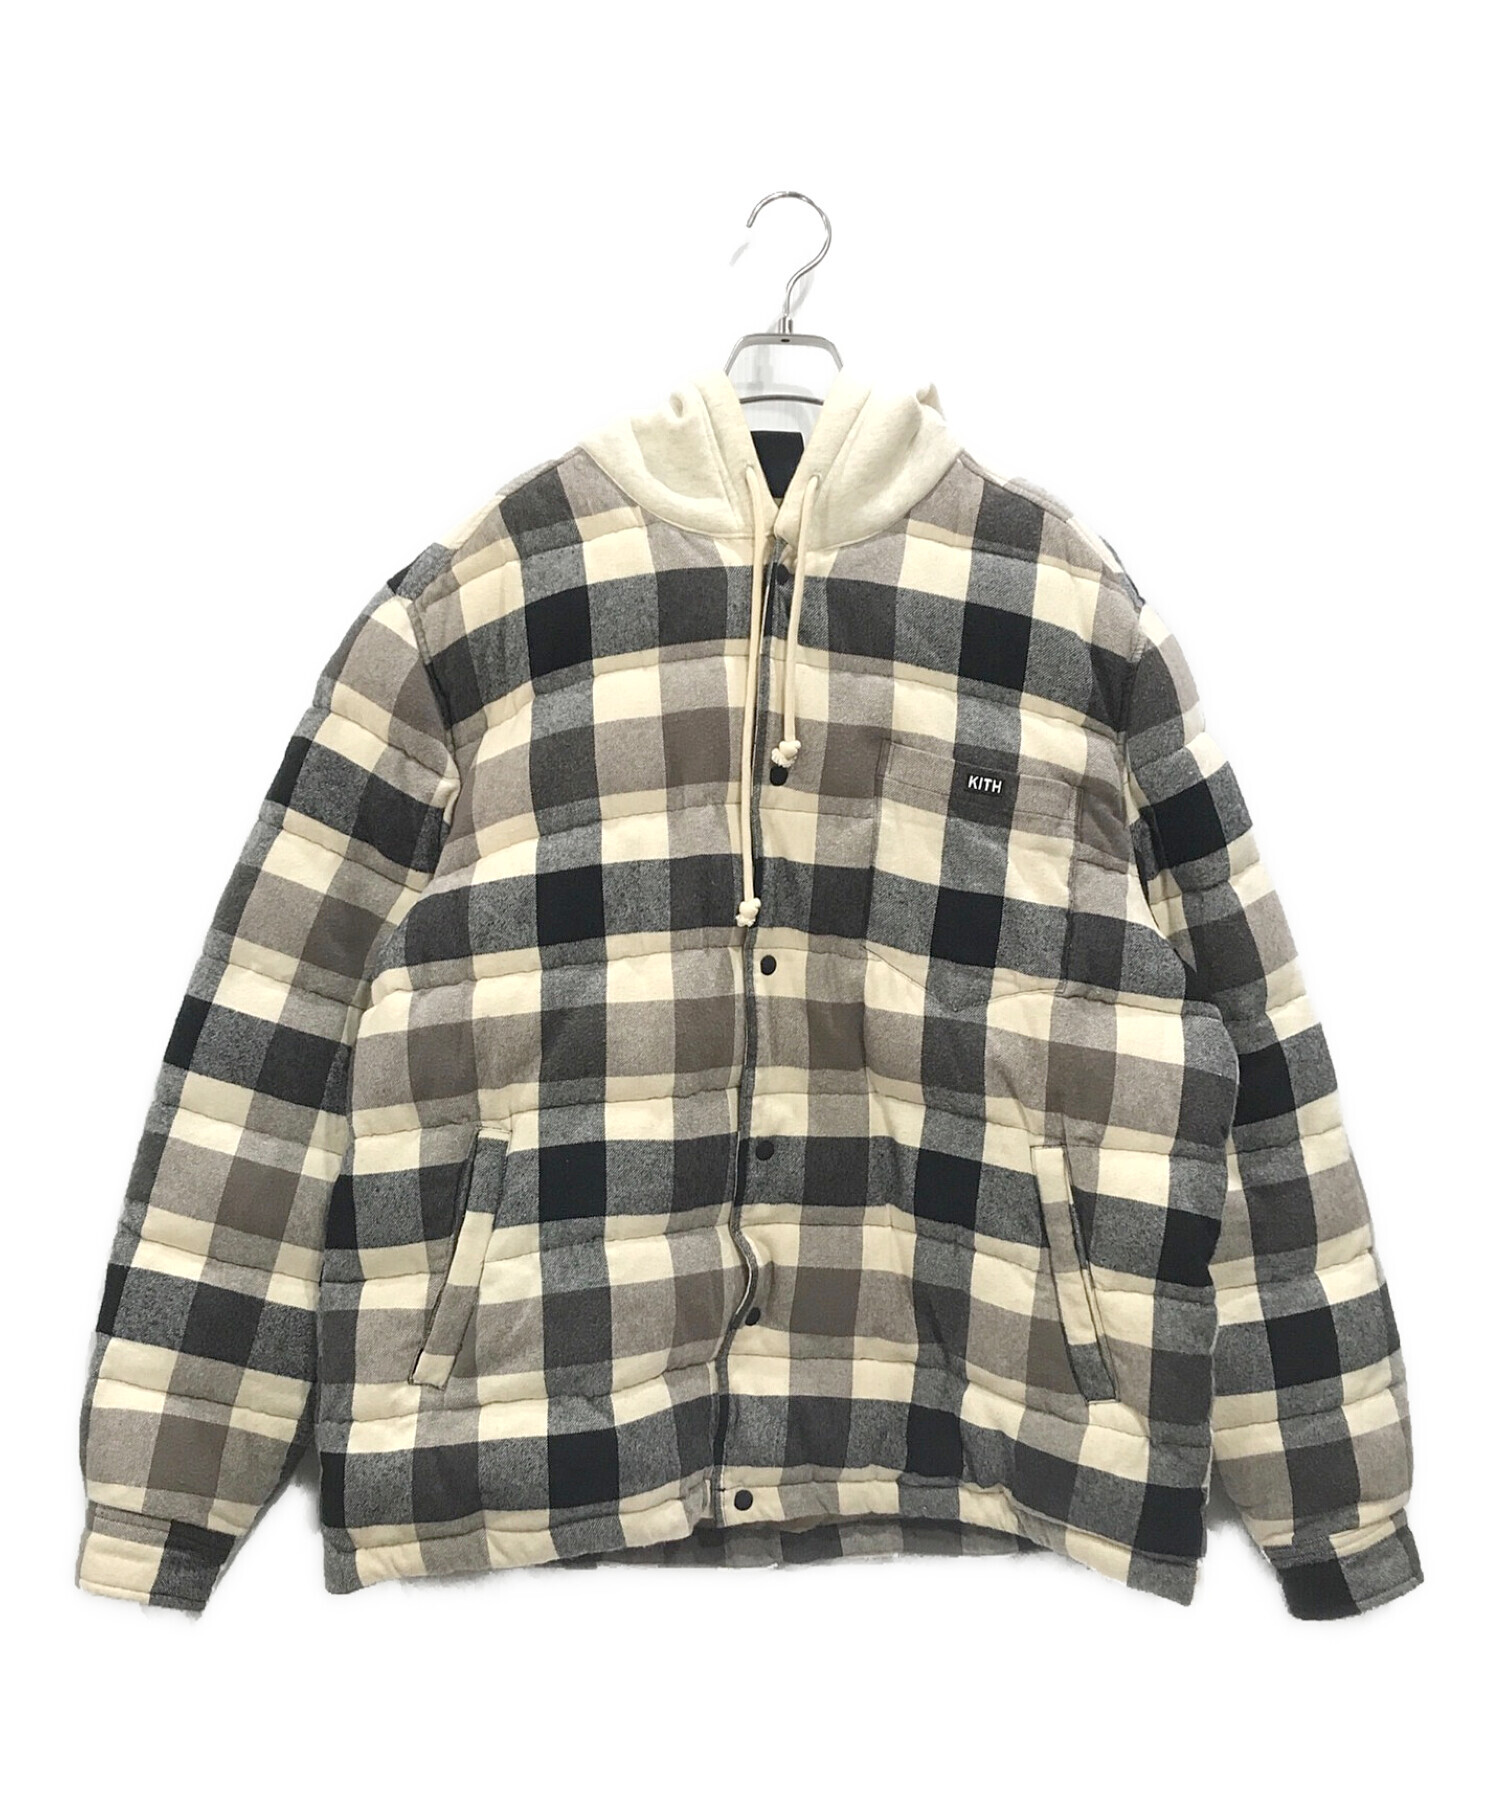 KITH キスSTERLING QUILTED SHIRT PUFFERフード周り汚れあり